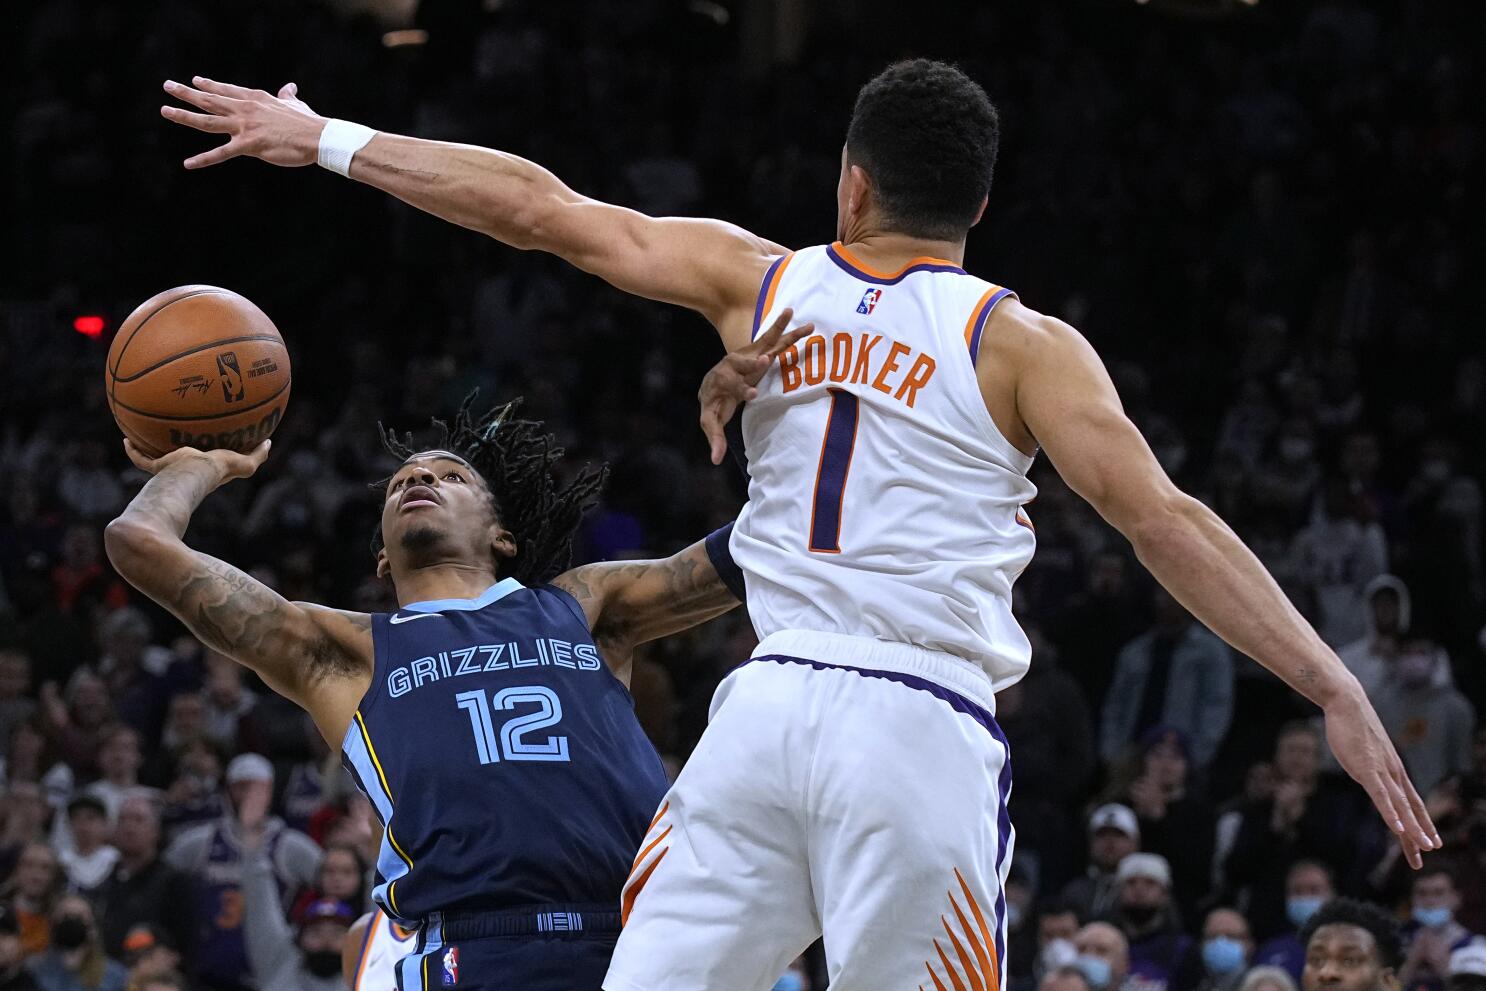 Preview: Suns host Grizzlies hoping to avoid losing streak